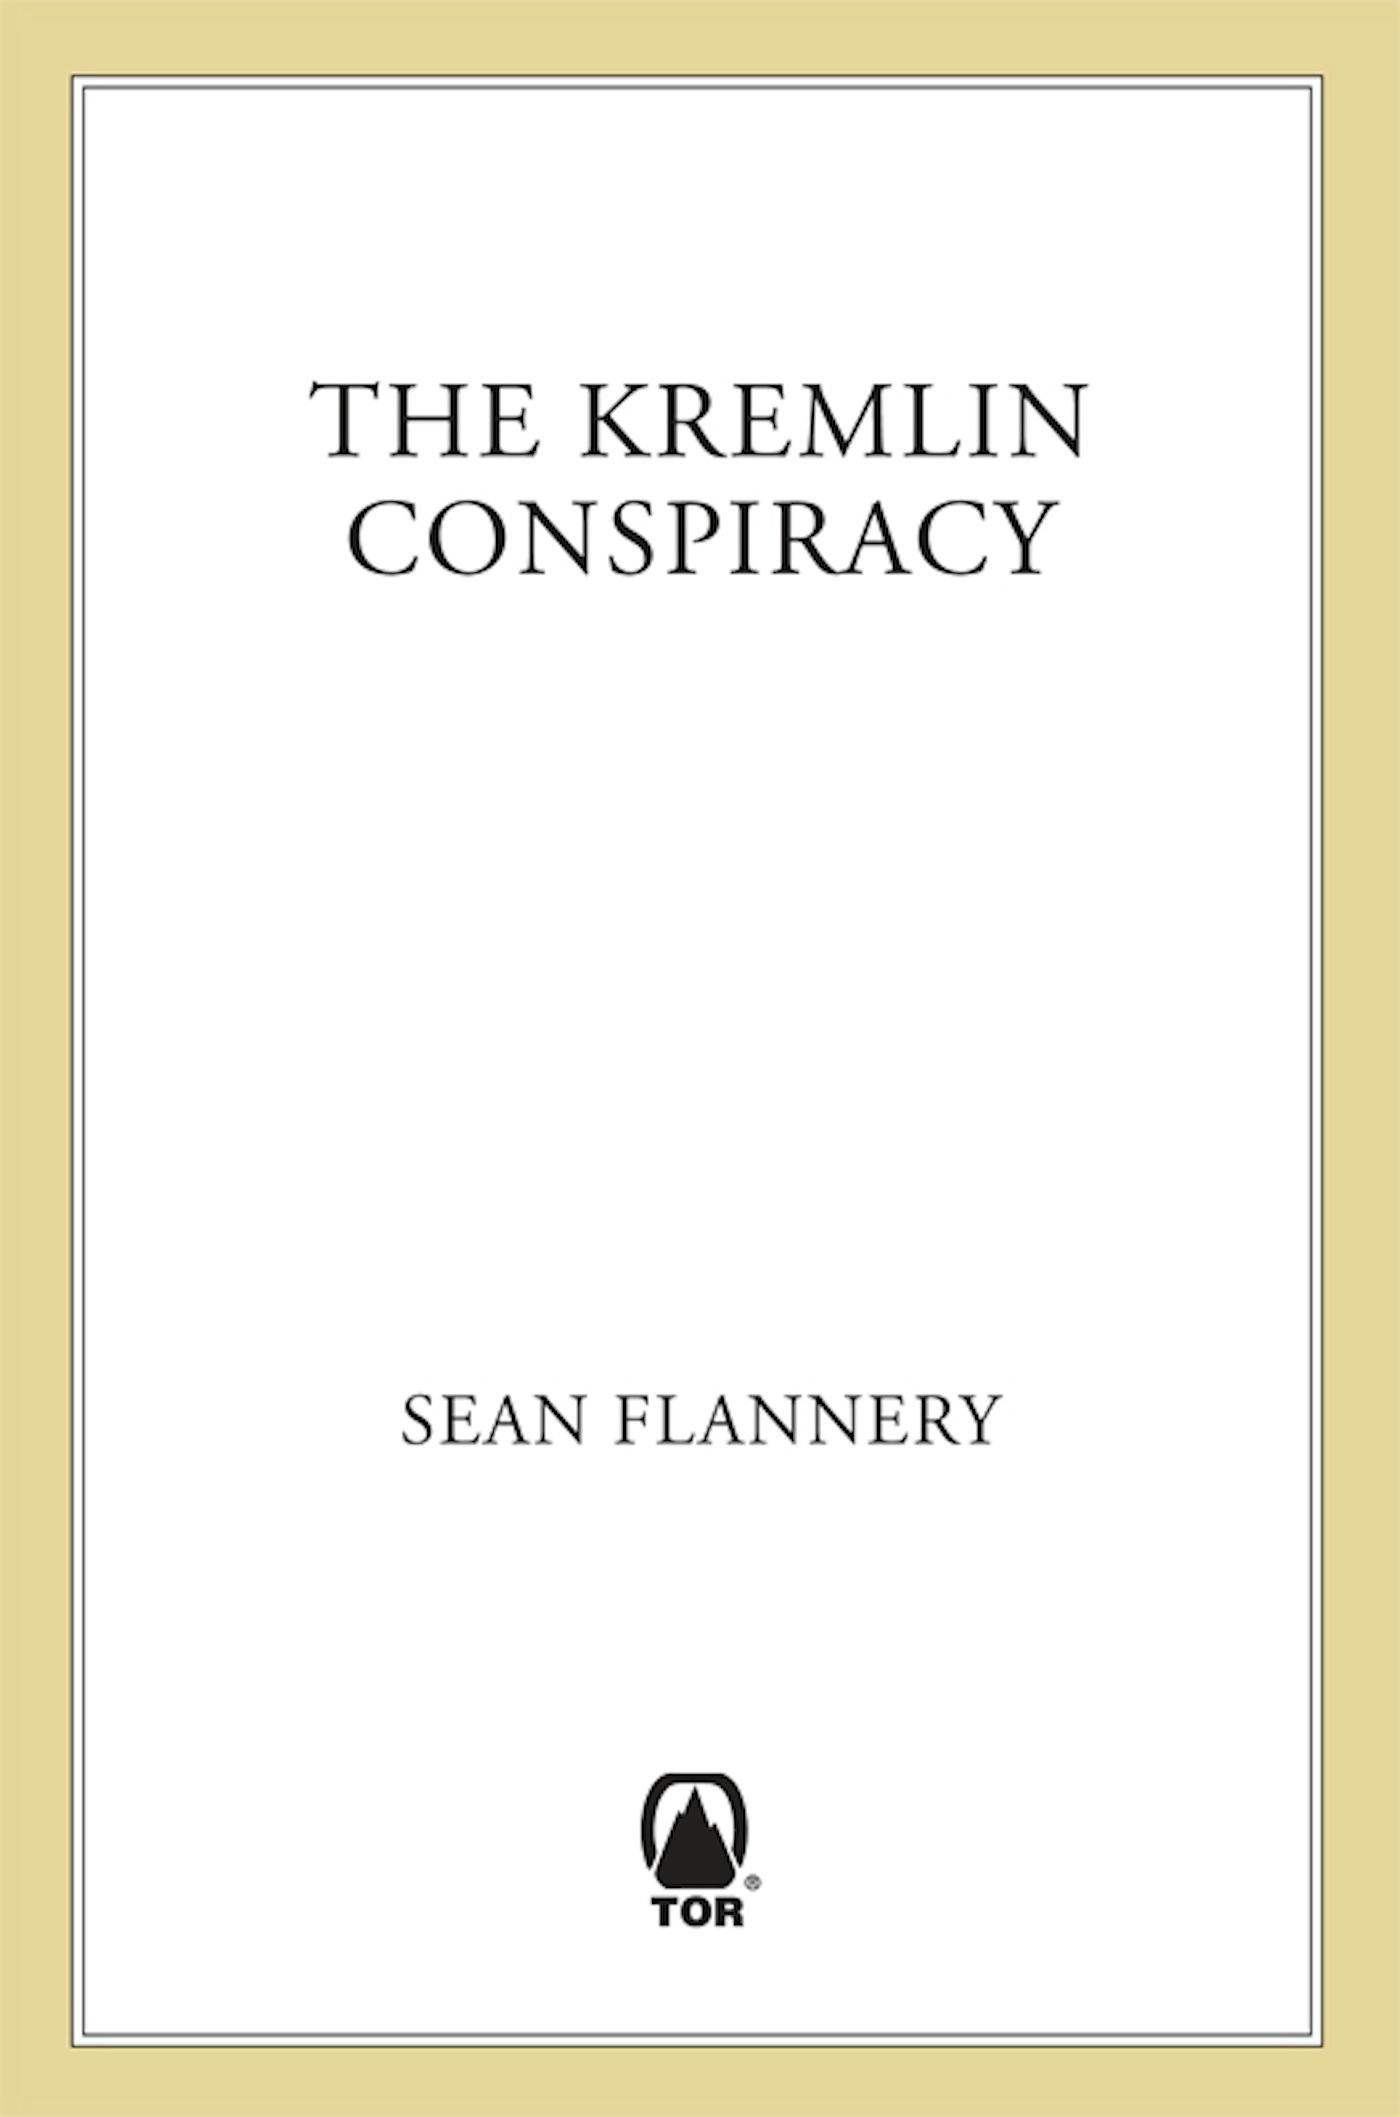 Cover for the book titled as: The Kremlin Conspiracy